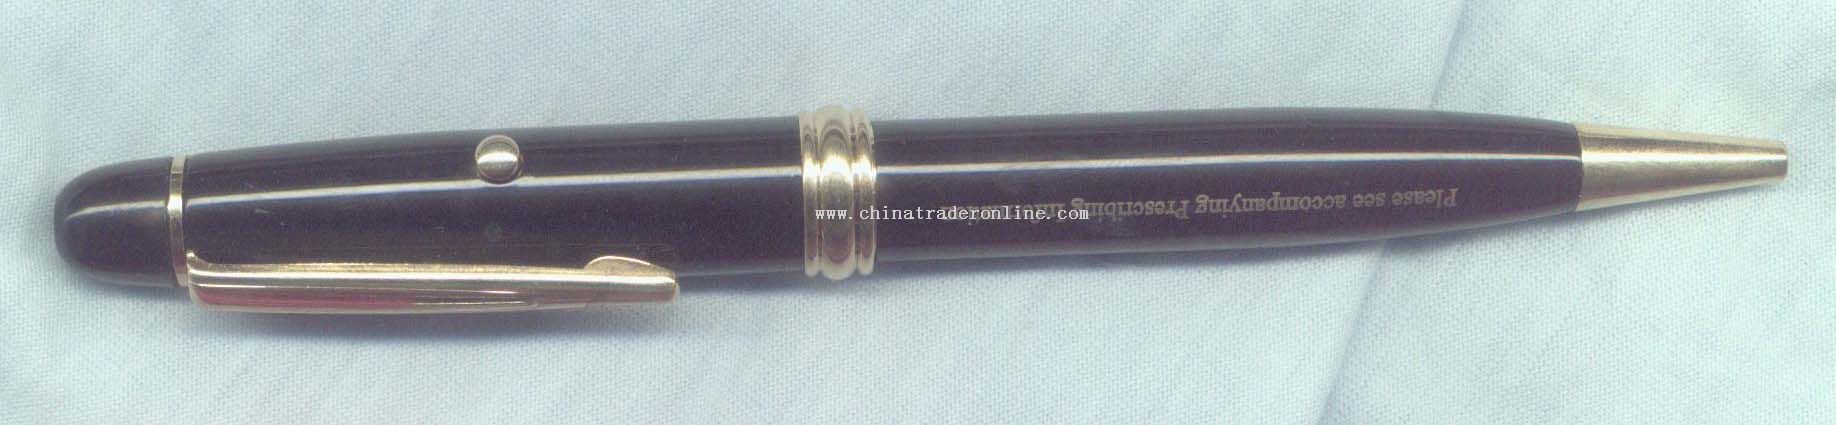 MB laser pen from China